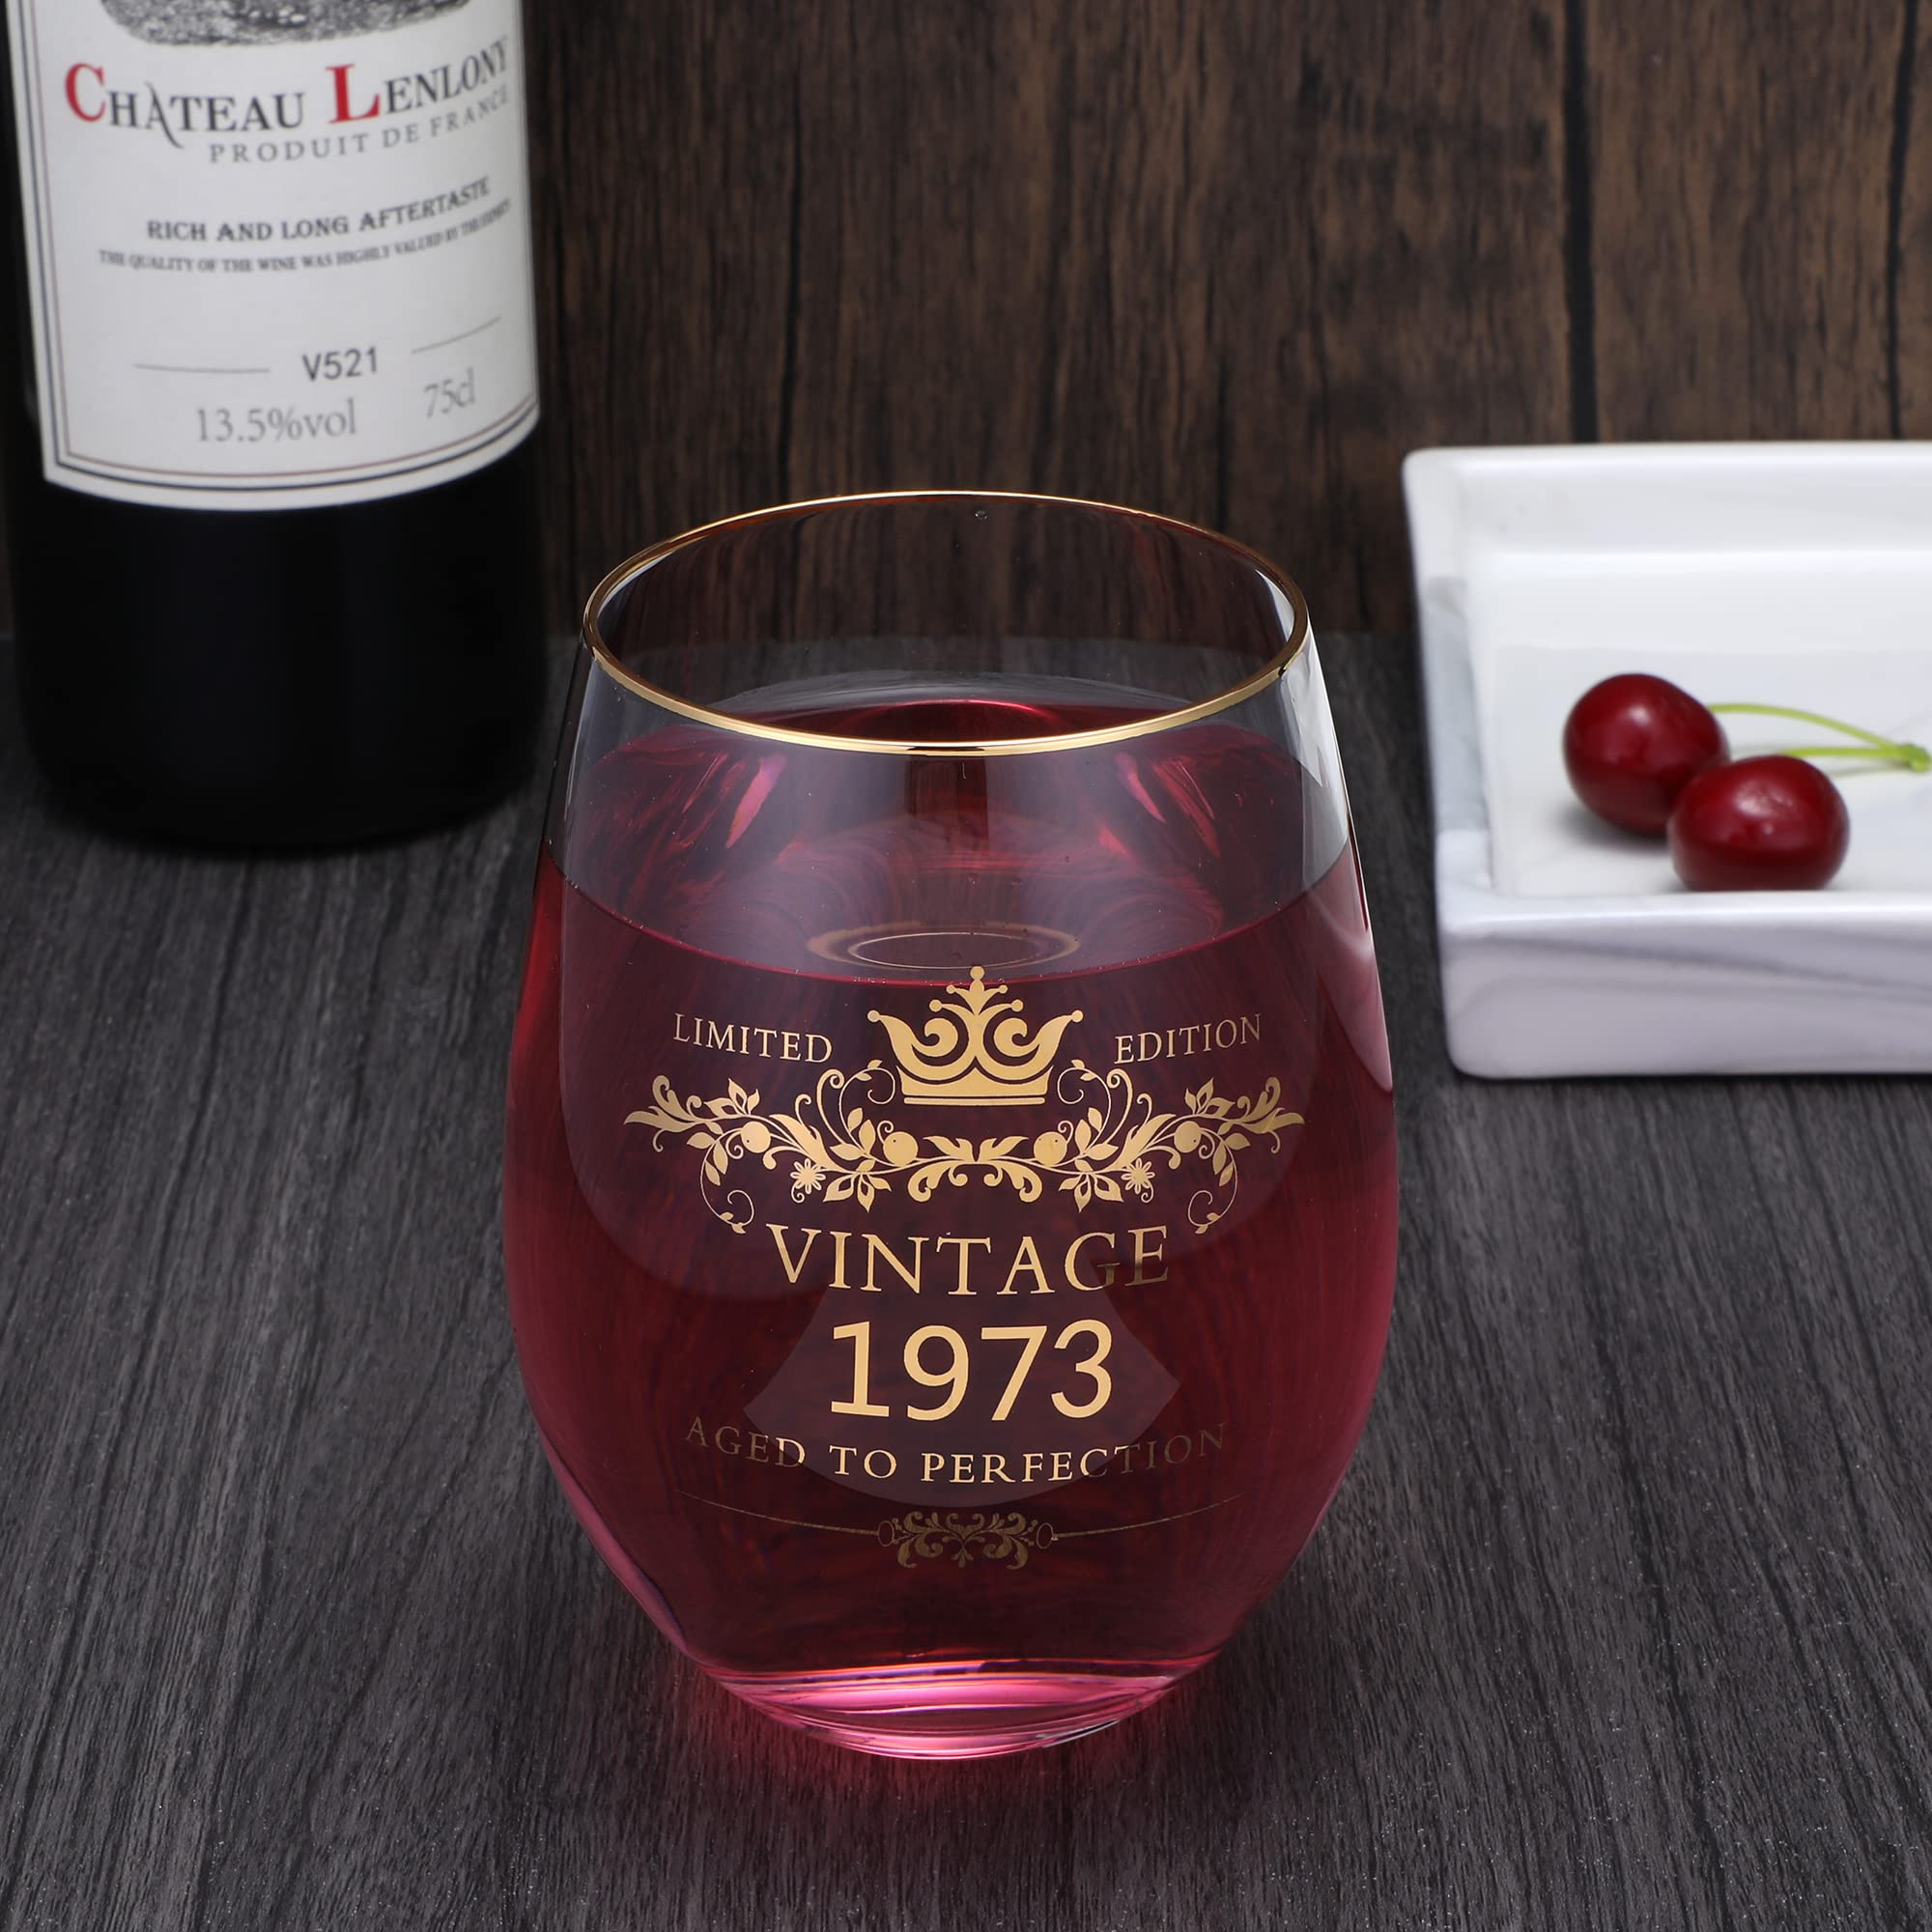 wufengye 1973 51th Birthday Gifts for Women Men 15 Ounce Wine Glasses Classic Birthday Gift Water Tumbler Juice Cup Happy Birthday Present .1973 Vintage Edition 51th Anniversary